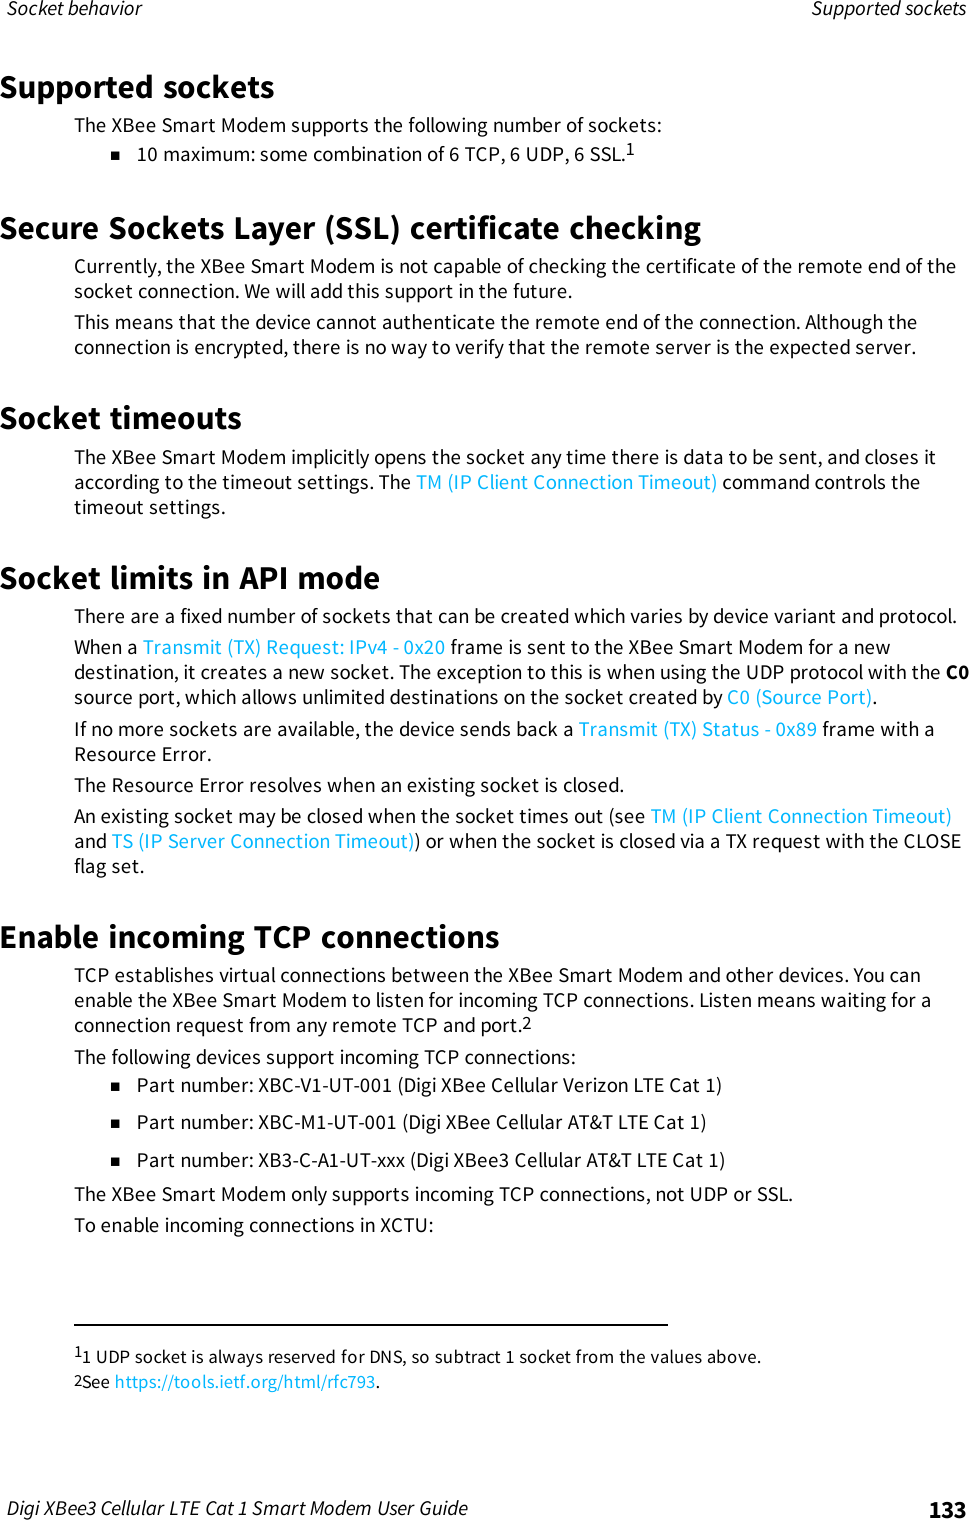 Socket behavior Supported socketsDigi XBee3 Cellular LTE Cat 1 Smart Modem User Guide 133Supported socketsThe XBee Smart Modem supports the following number of sockets:n10 maximum: some combination of 6 TCP, 6 UDP, 6 SSL.1Secure Sockets Layer (SSL) certificate checkingCurrently, the XBee Smart Modem is not capable of checking the certificate of the remote end of thesocket connection. We will add this support in the future.This means that the device cannot authenticate the remote end of the connection. Although theconnection is encrypted, there is no way to verify that the remote server is the expected server.Socket timeoutsThe XBee Smart Modem implicitly opens the socket any time there is data to be sent, and closes itaccording to the timeout settings. The TM (IP Client Connection Timeout) command controls thetimeout settings.Socket limits in API modeThere are a fixed number of sockets that can be created which varies by device variant and protocol.When a Transmit (TX) Request: IPv4 - 0x20 frame is sent to the XBee Smart Modem for a newdestination, it creates a new socket. The exception to this is when using the UDP protocol with the C0source port, which allows unlimited destinations on the socket created by C0 (Source Port).If no more sockets are available, the device sends back a Transmit (TX) Status - 0x89 frame with aResource Error.The Resource Error resolves when an existing socket is closed.An existing socket may be closed when the socket times out (see TM (IP Client Connection Timeout)and TS (IP Server Connection Timeout)) or when the socket is closed via a TX request with the CLOSEflag set.Enable incoming TCP connectionsTCP establishes virtual connections between the XBee Smart Modem and other devices. You canenable the XBee Smart Modem to listen for incoming TCP connections. Listen means waiting for aconnection request from any remote TCP and port.2The following devices support incoming TCP connections:nPart number: XBC-V1-UT-001 (Digi XBee Cellular Verizon LTE Cat 1)nPart number: XBC-M1-UT-001 (Digi XBee Cellular AT&amp;T LTE Cat 1)nPart number: XB3-C-A1-UT-xxx (Digi XBee3 Cellular AT&amp;T LTE Cat 1)The XBee Smart Modem only supports incoming TCP connections, not UDP or SSL.To enable incoming connections in XCTU:11 UDPsocket is always reserved for DNS, so subtract 1 socket from the values above.2See https://tools.ietf.org/html/rfc793.